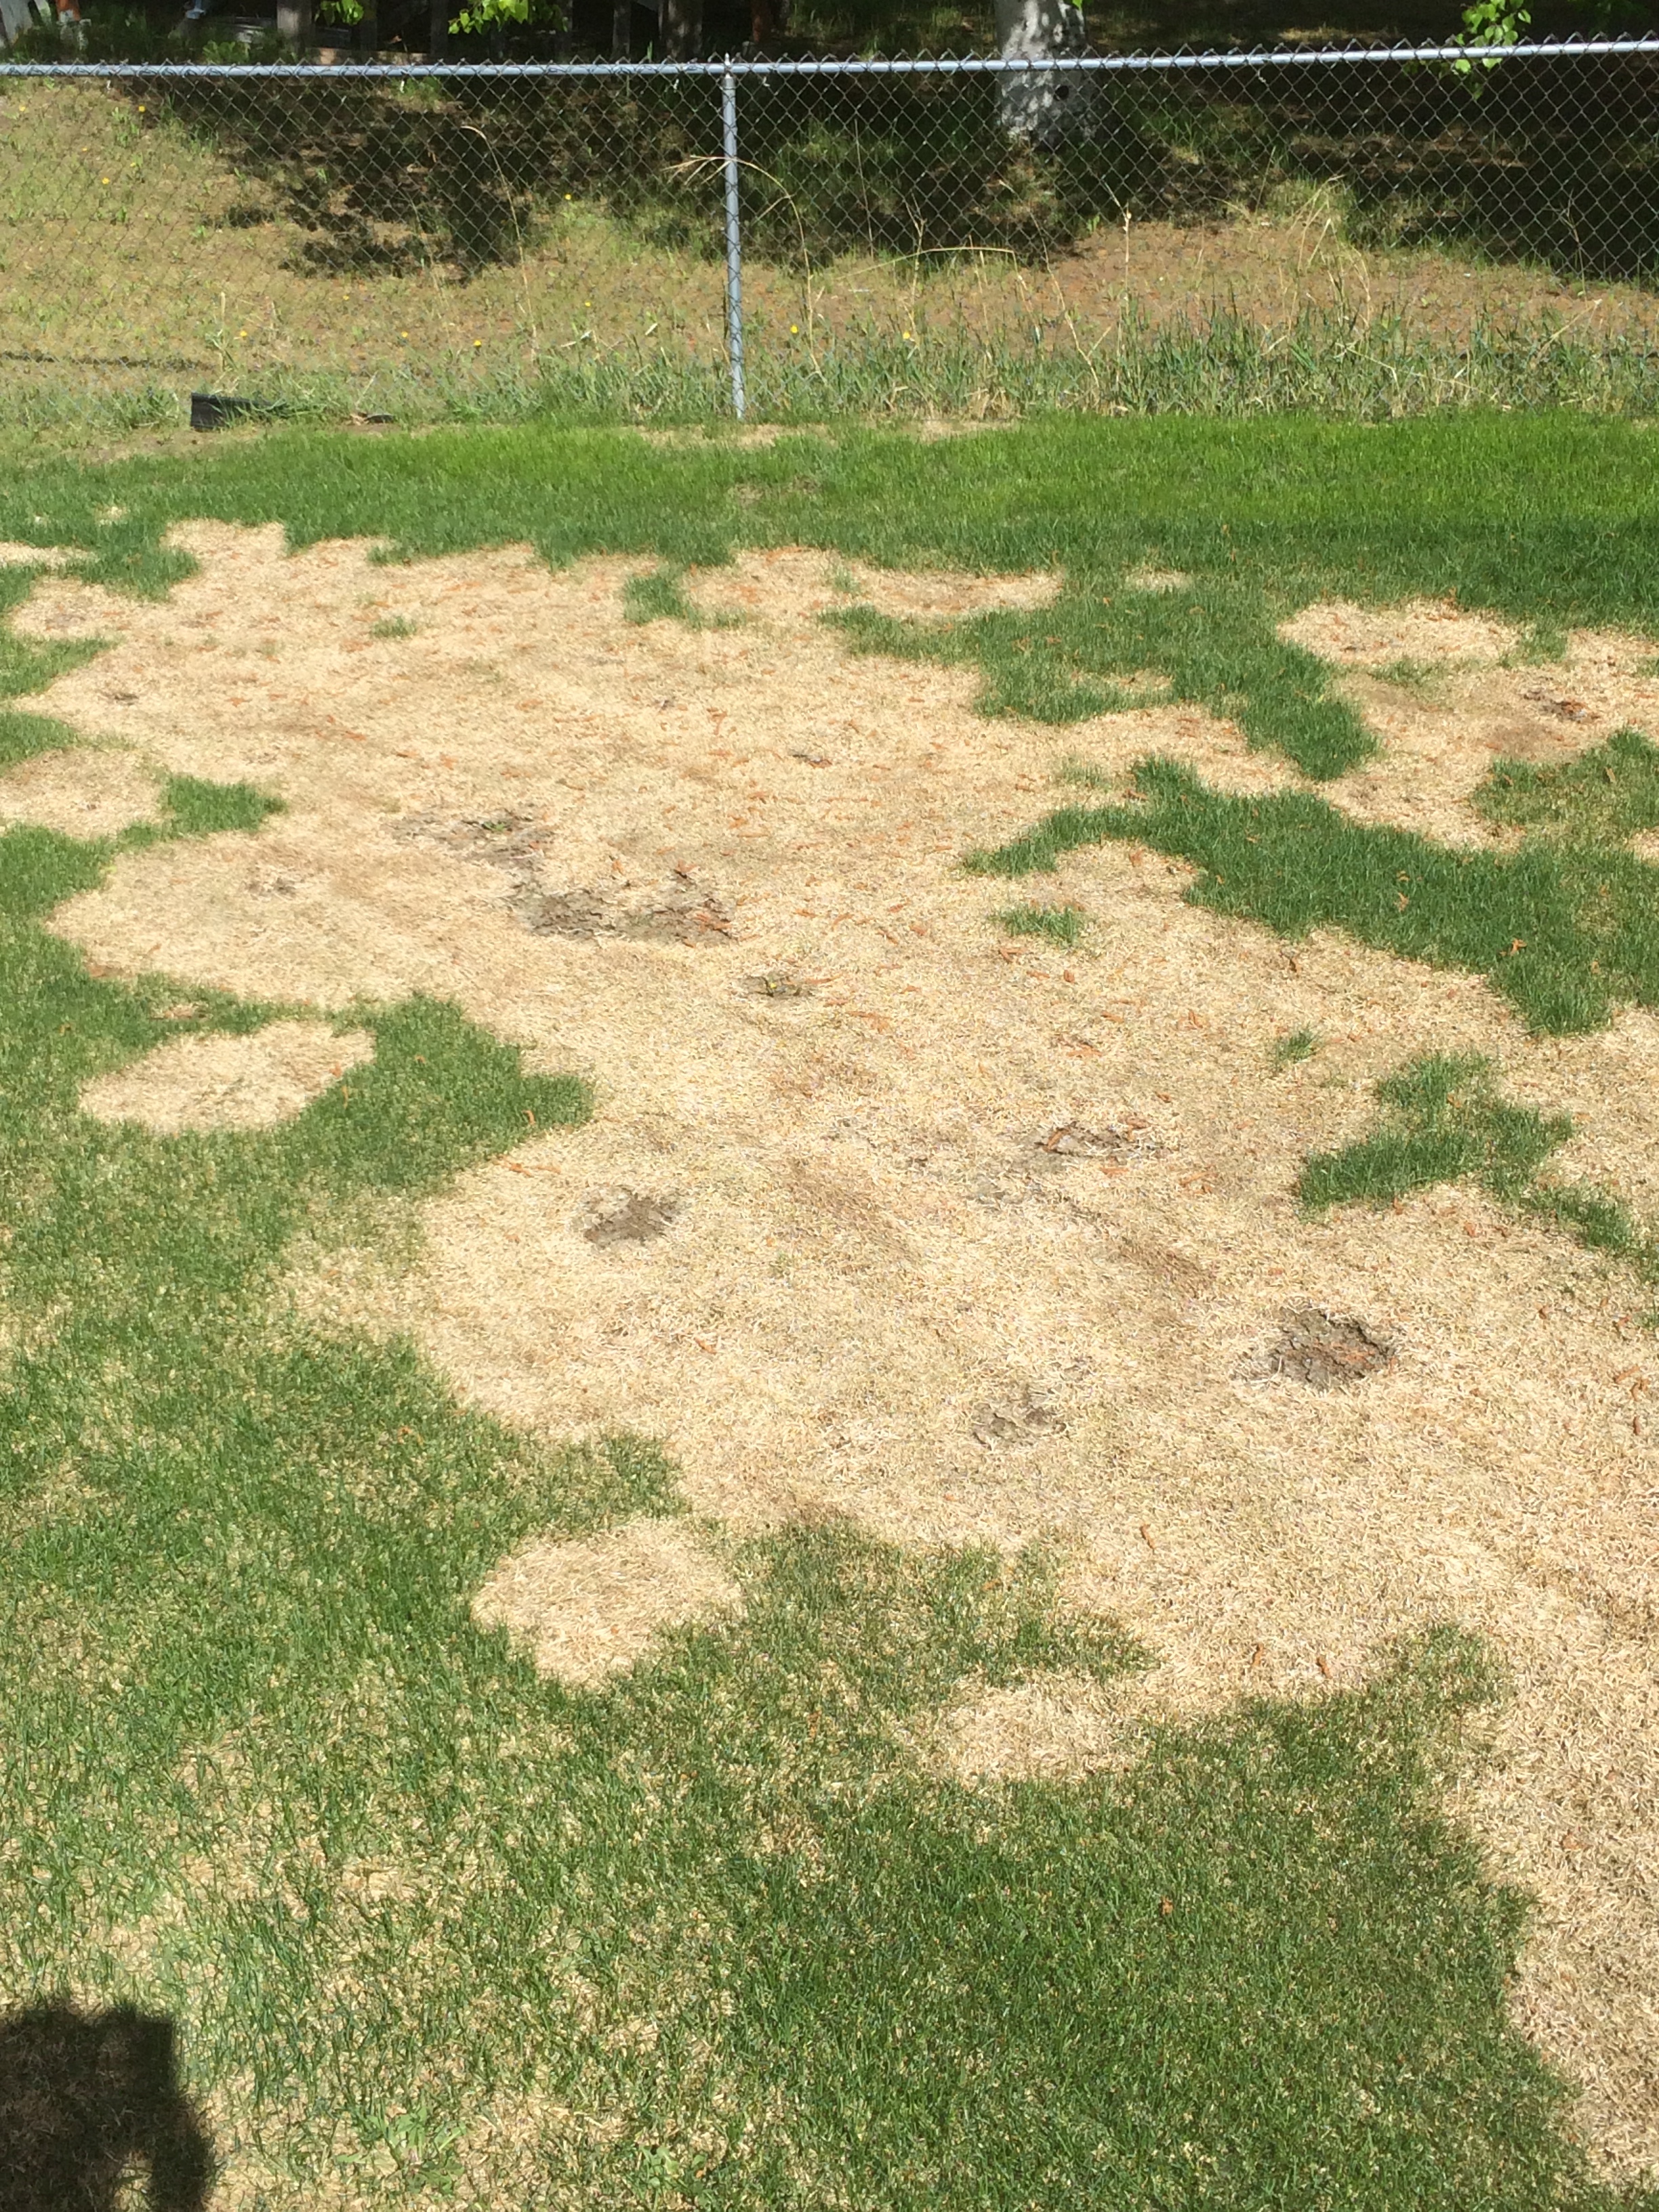 Bare patches/dead grass in lawn - Ask an Expert